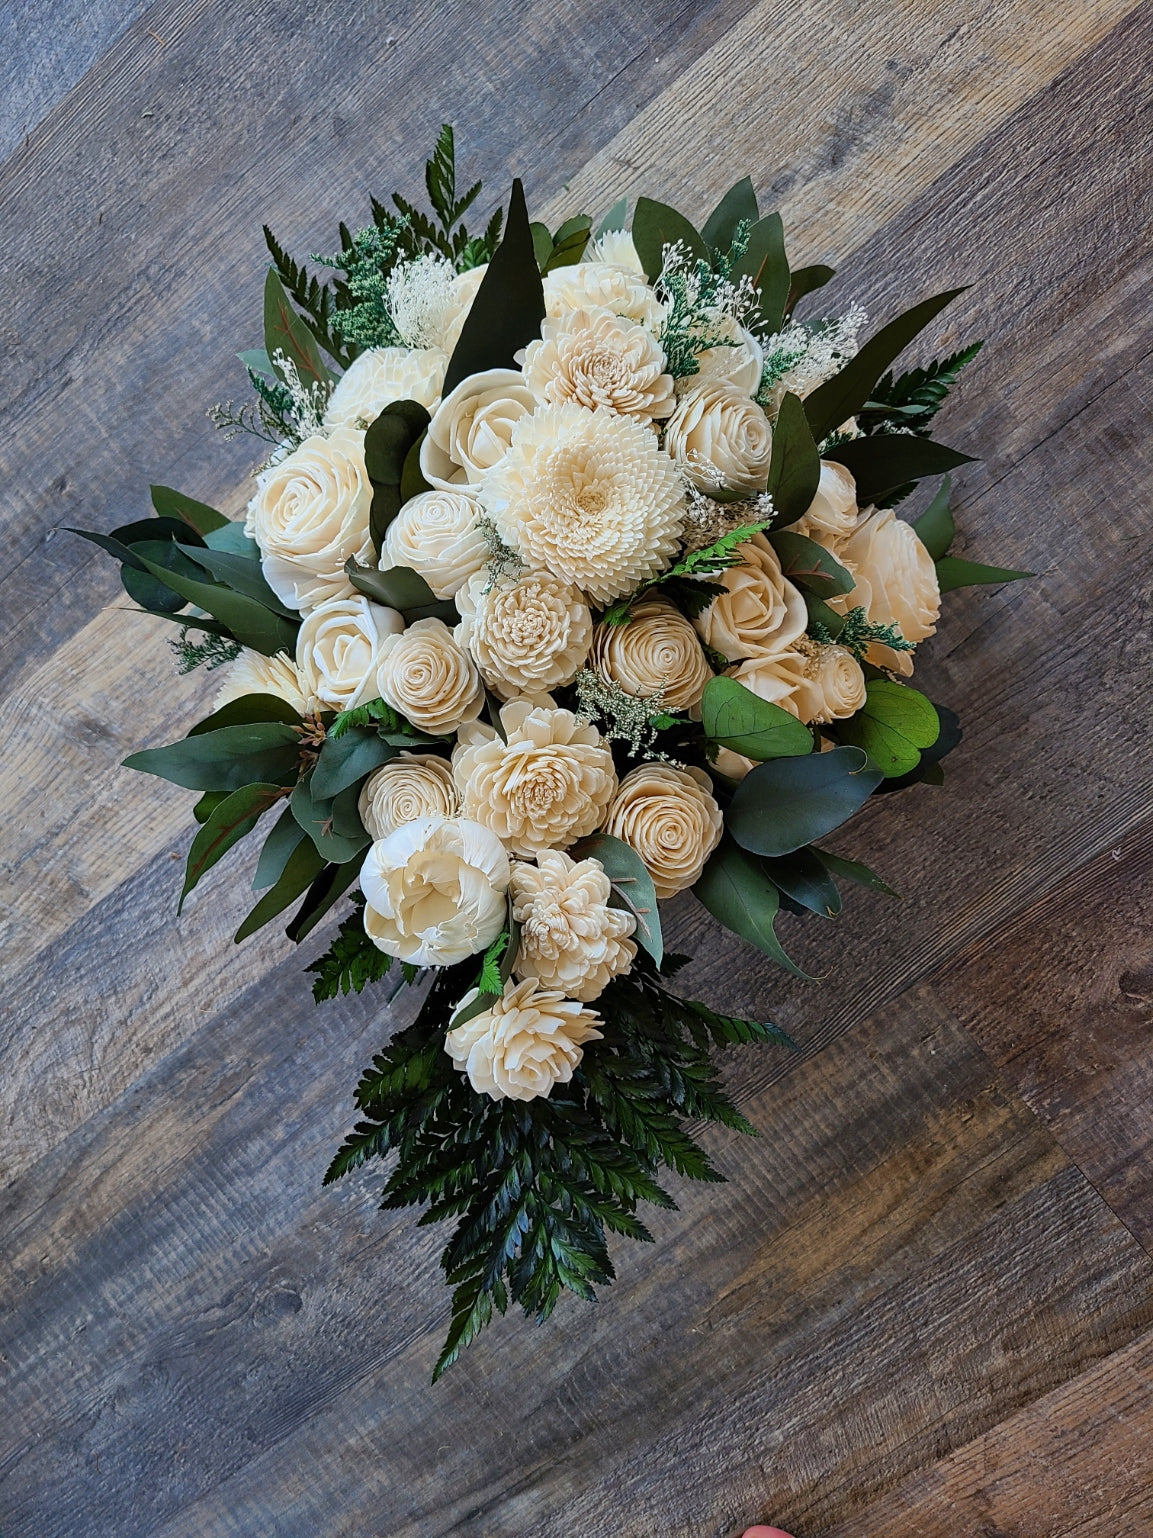 White Bridal Cascade with Greenery